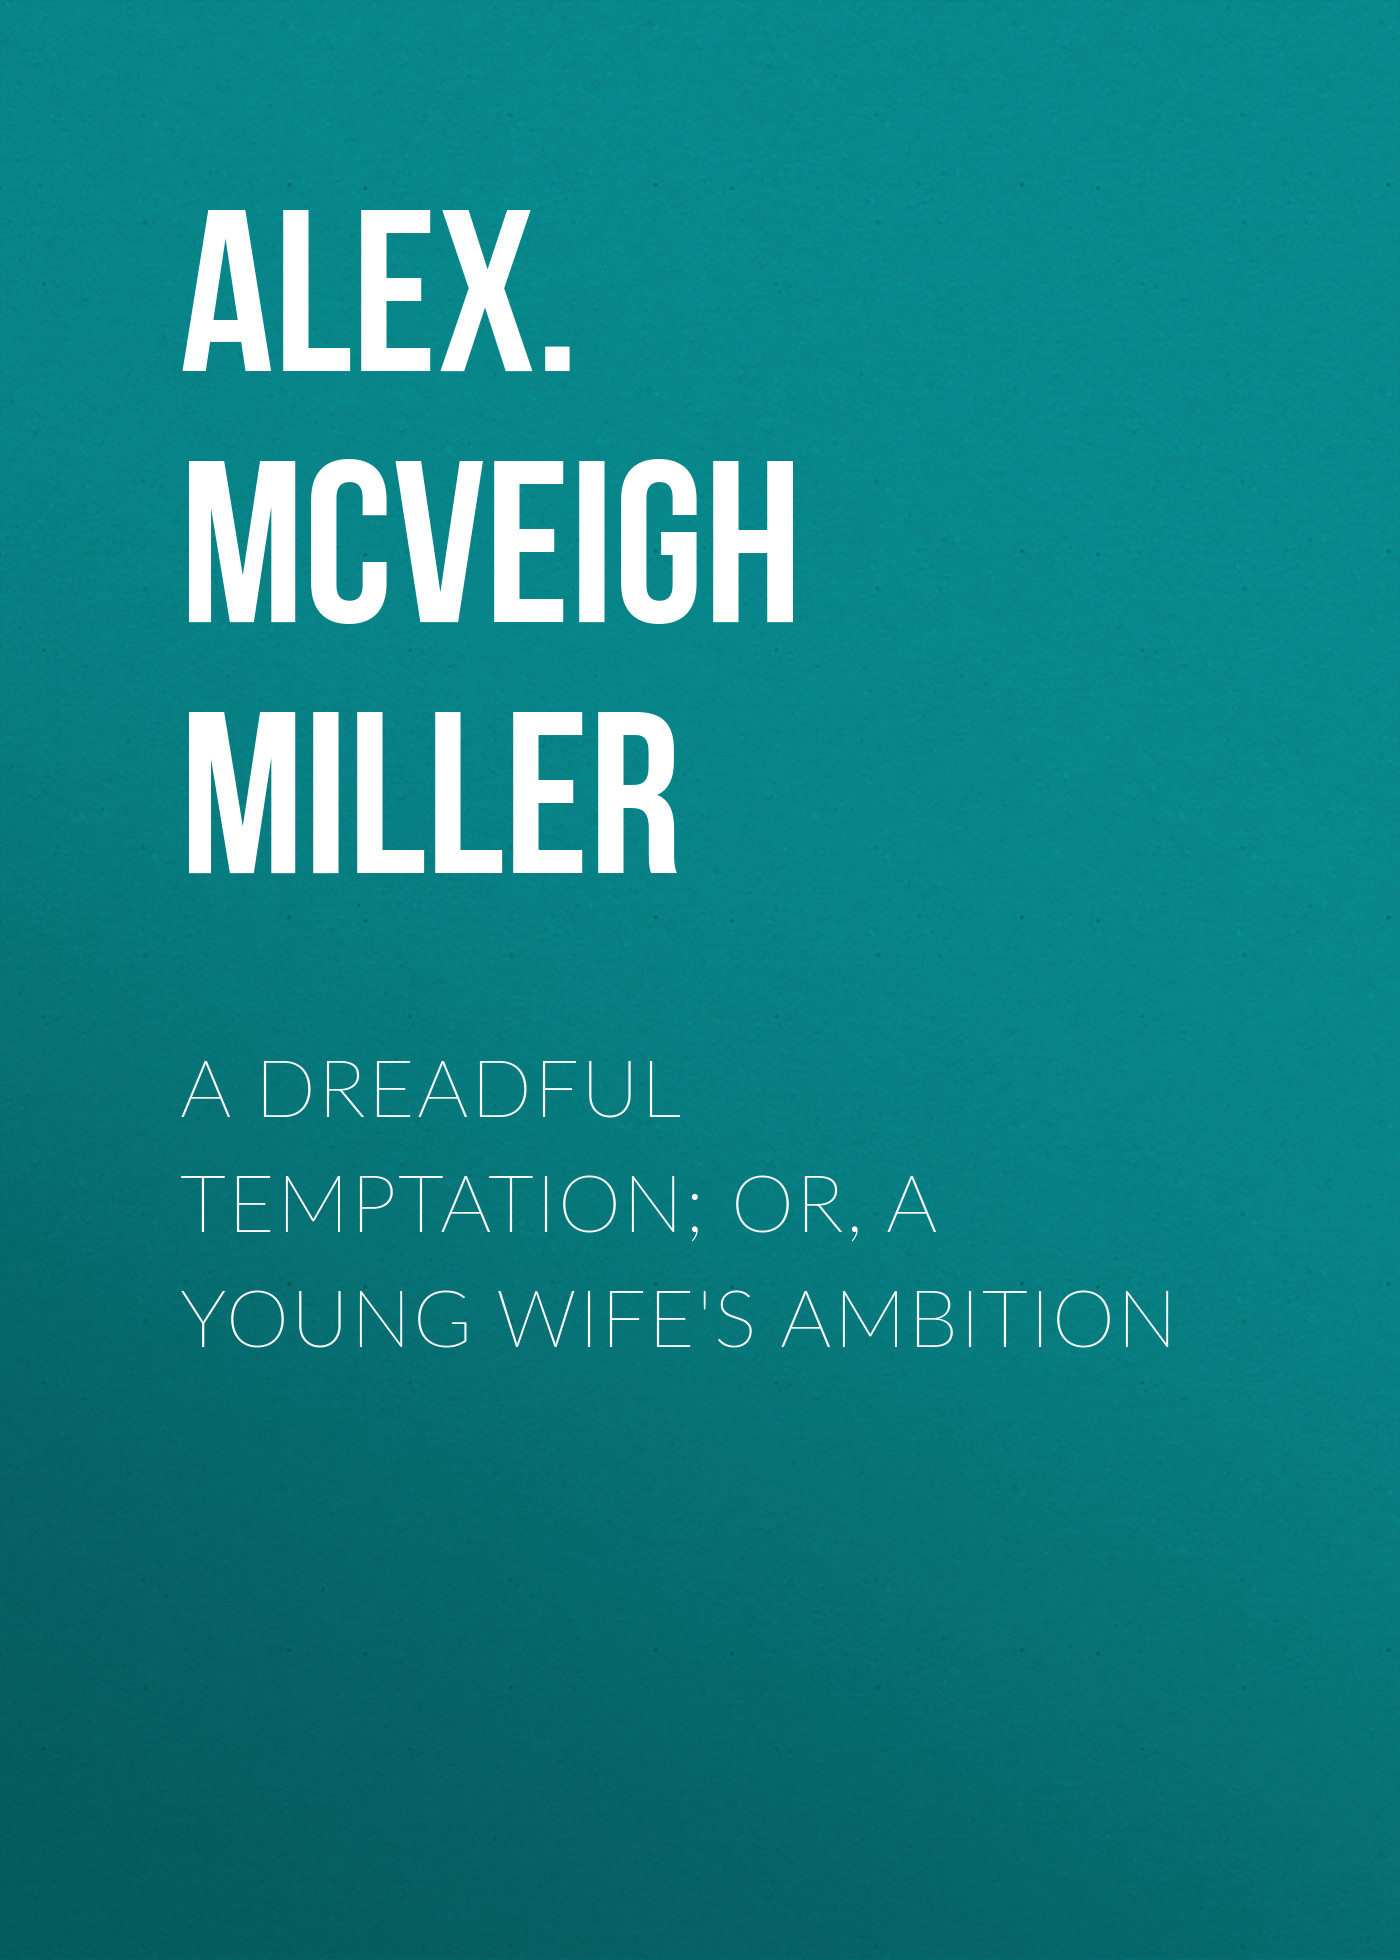 A Dreadful Temptation; or, A Young Wife's Ambition